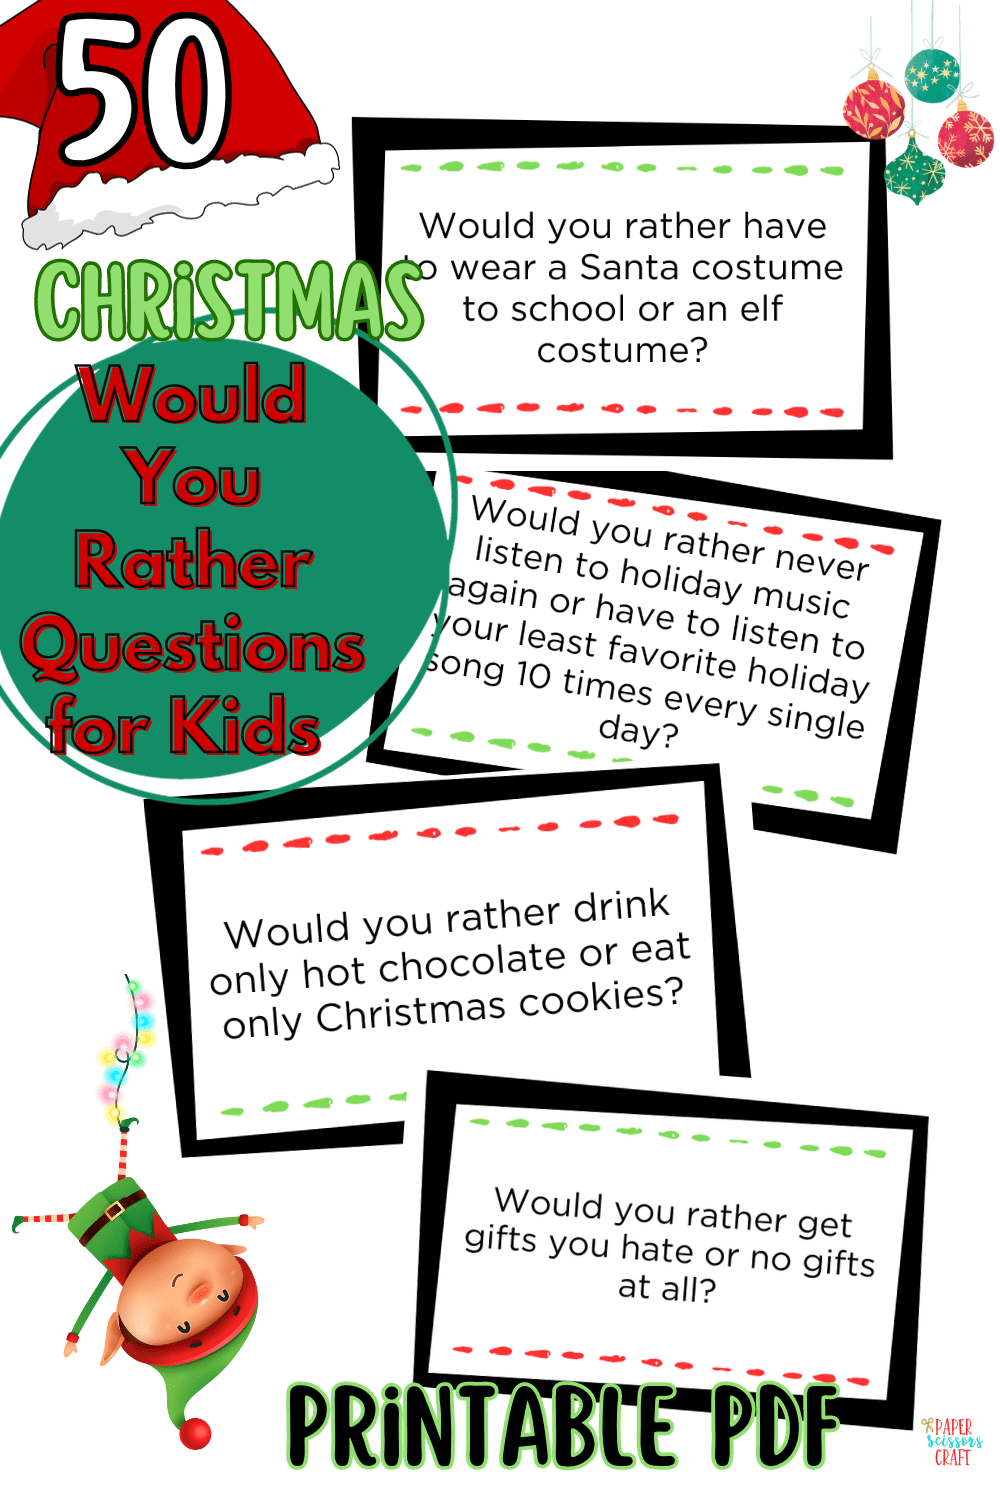 50 Christmas would you rather questions for kids.